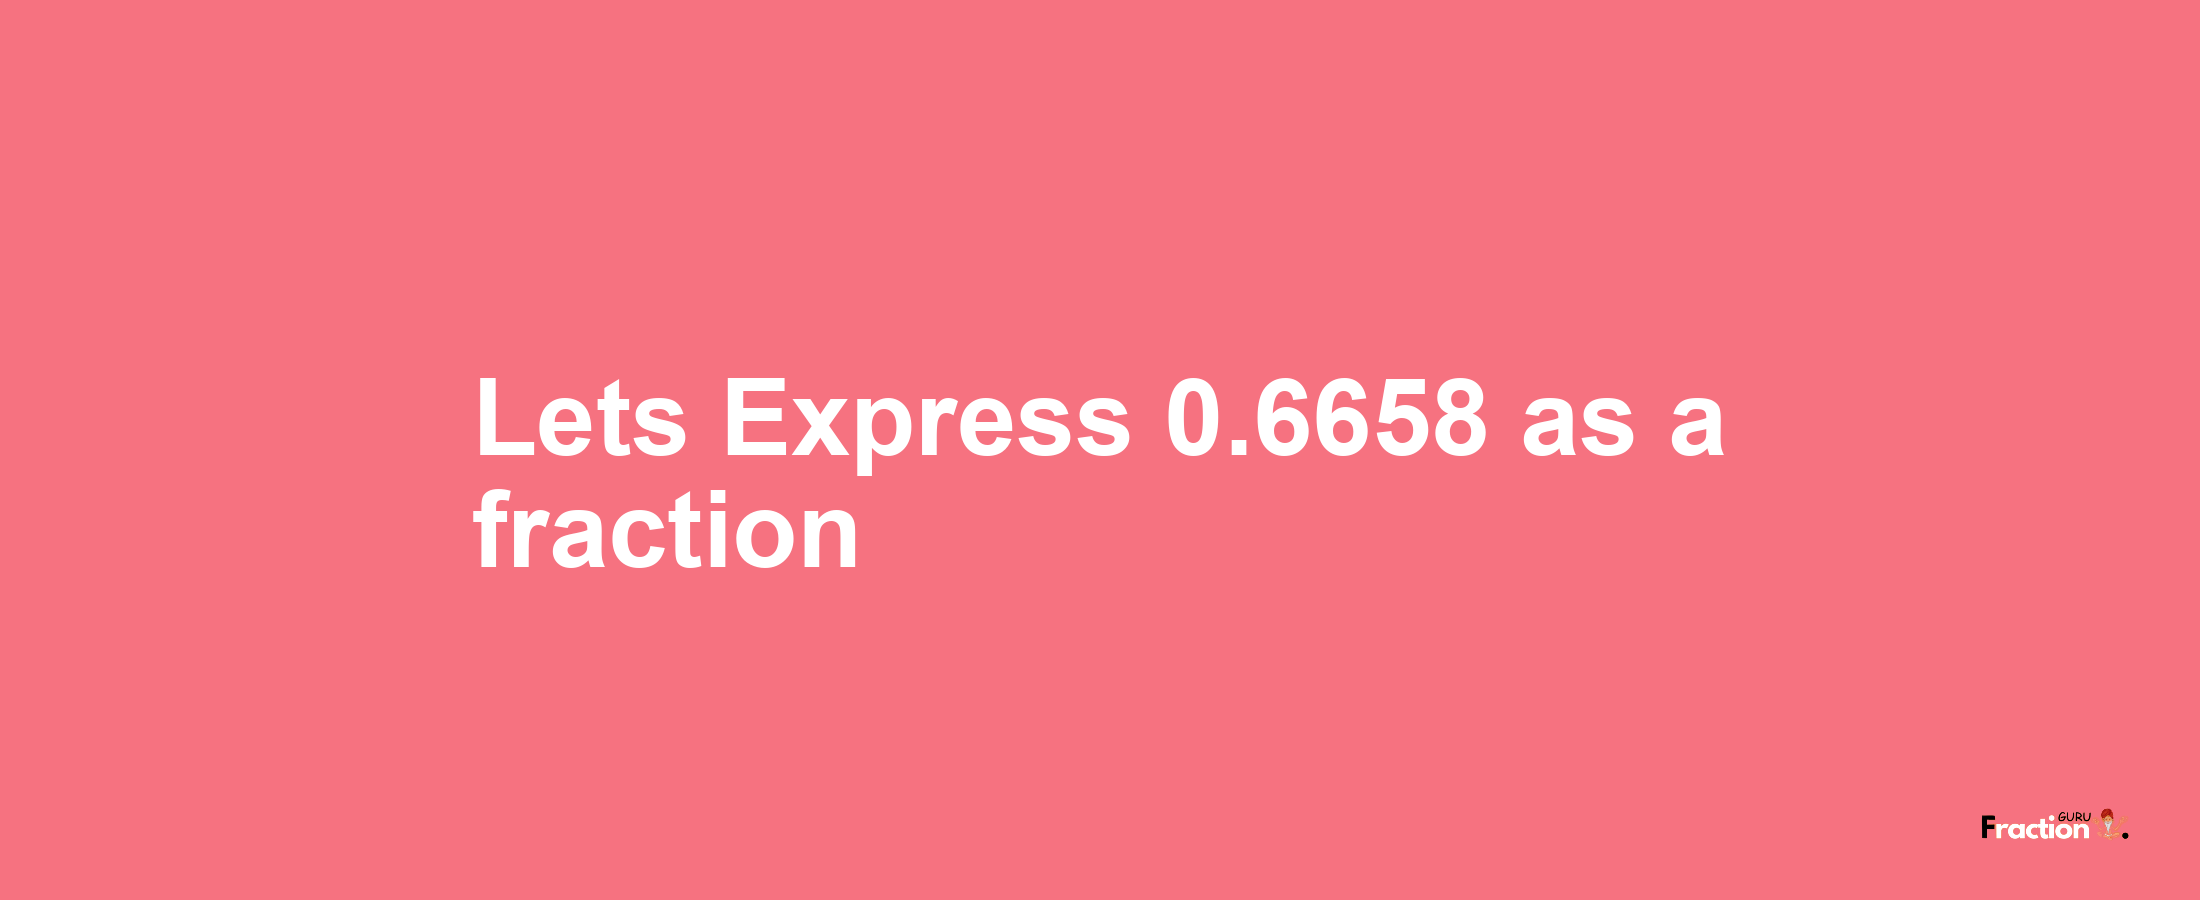 Lets Express 0.6658 as afraction